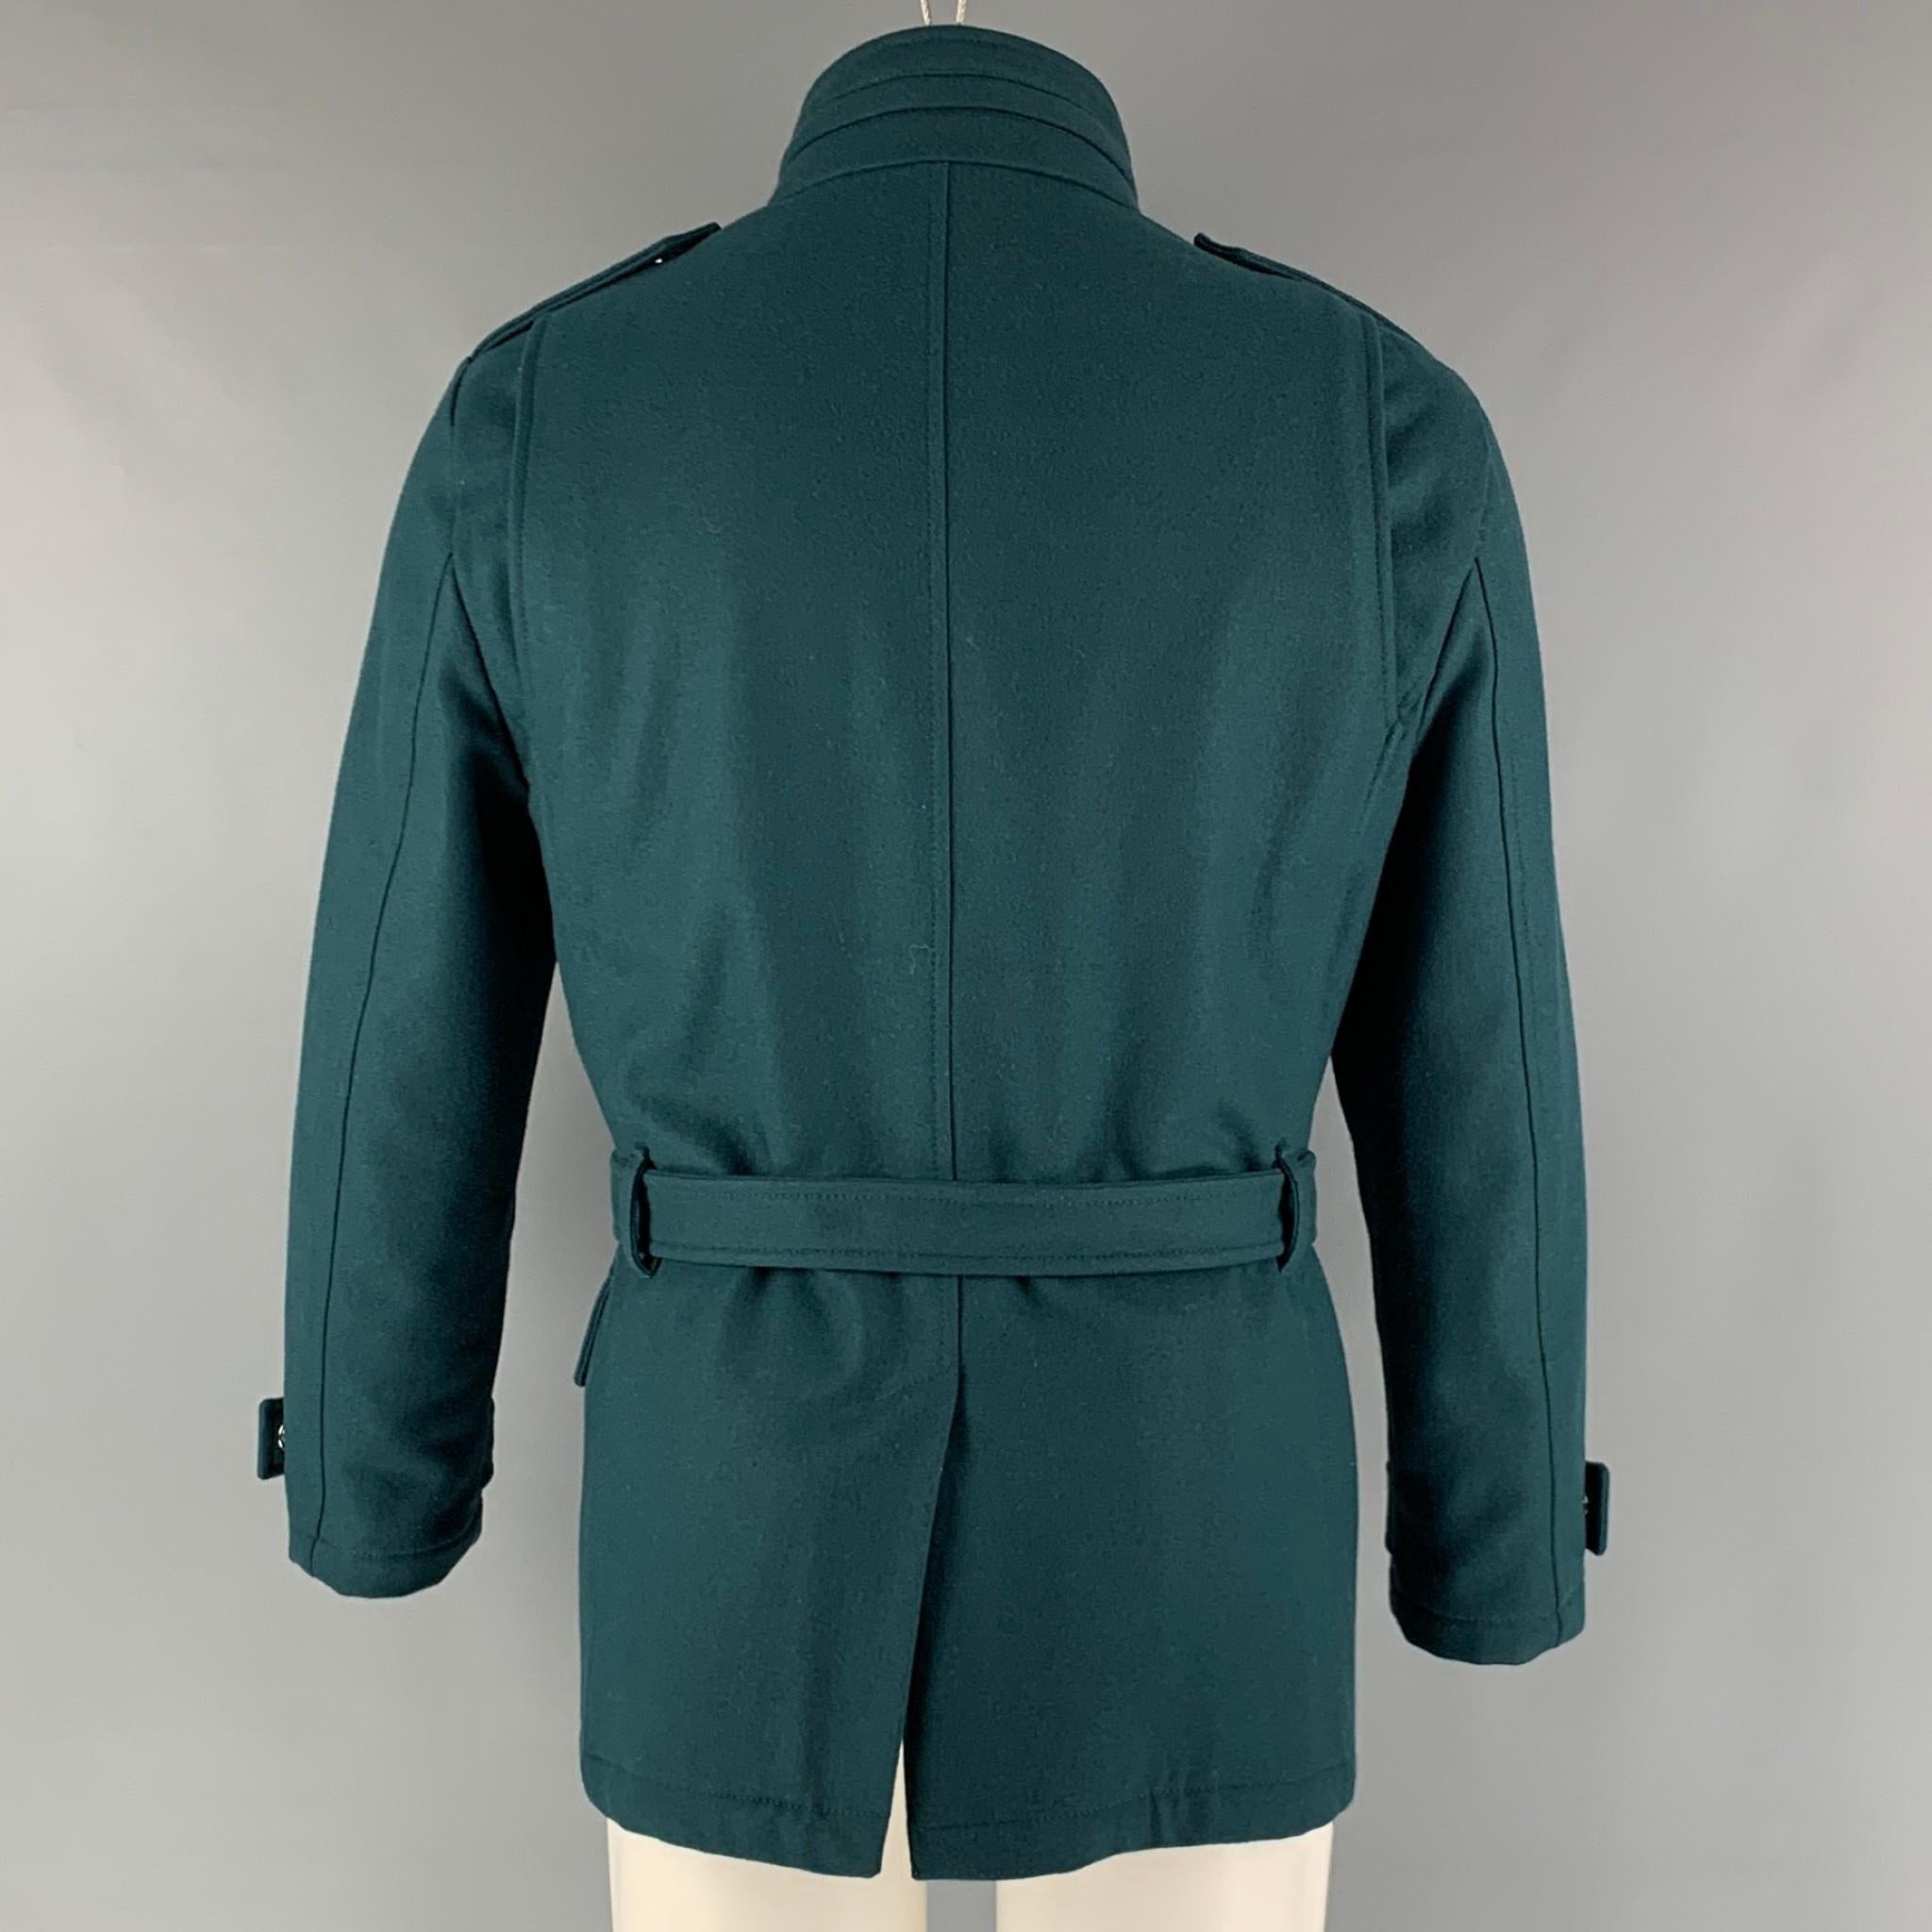 Men's VERSACE COLLECTION Size 38 Green Wool Blend Belted Jacket